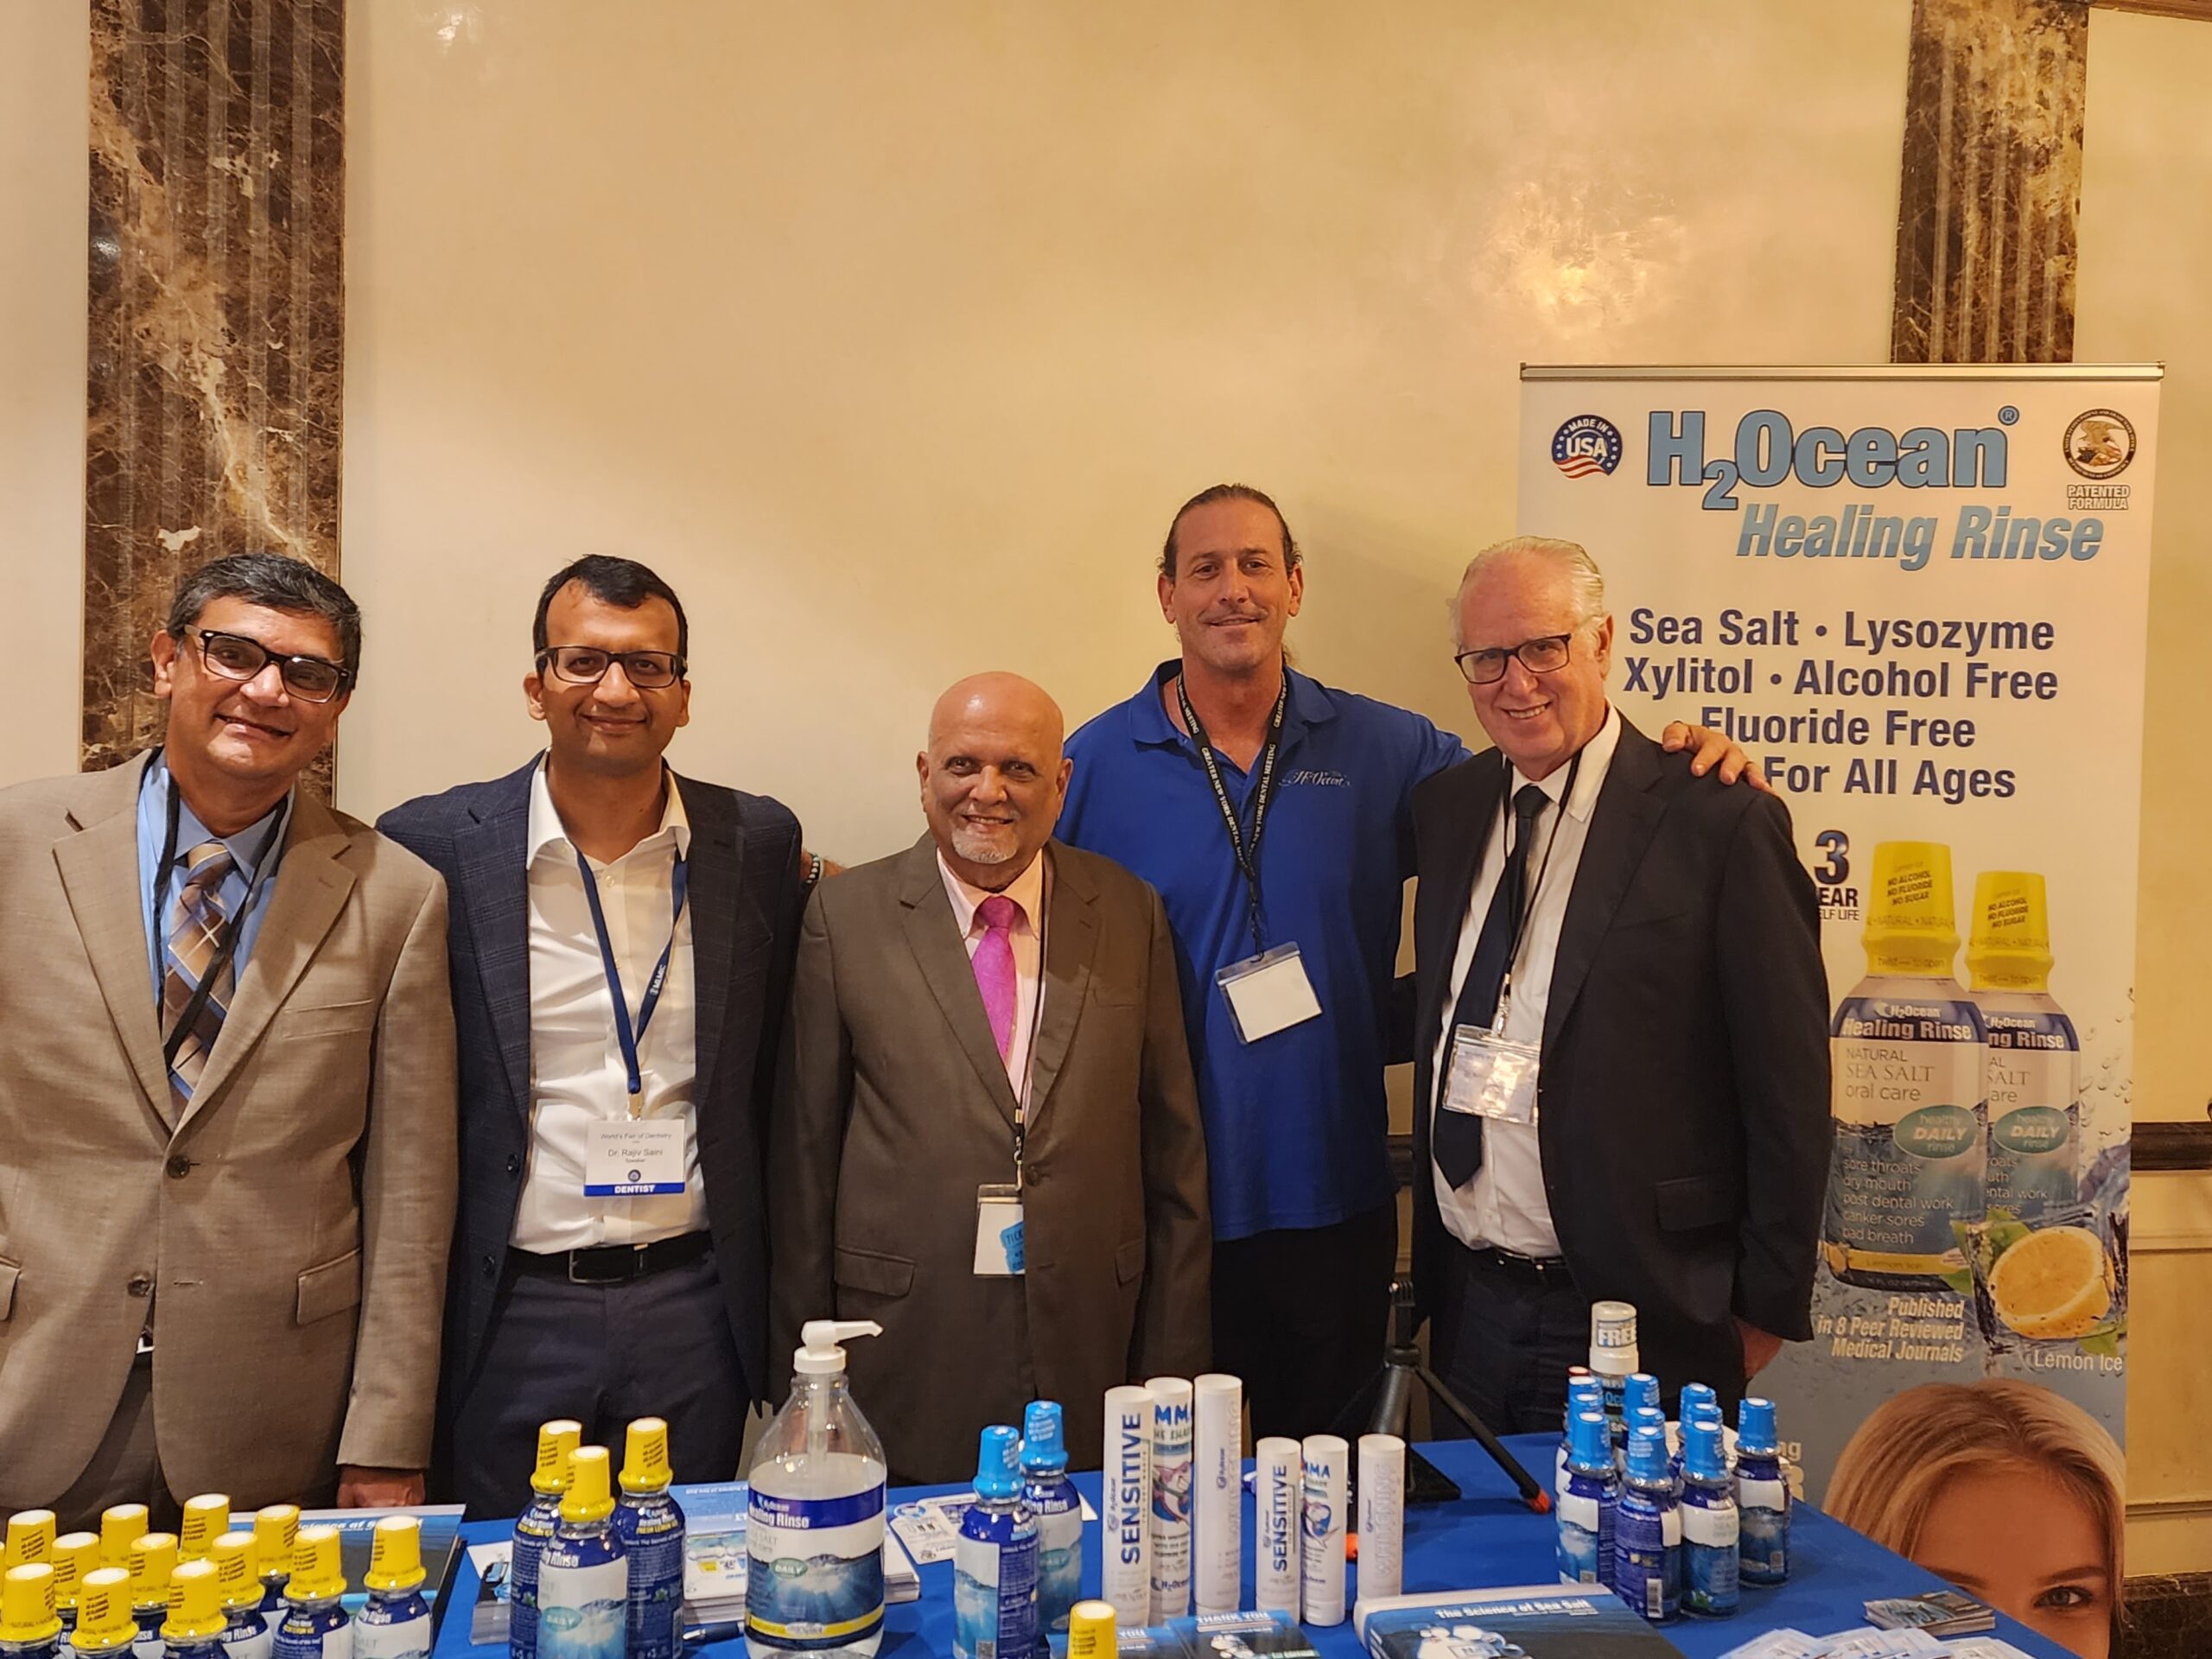 Dr. Rajiv Saini and Eddie Kolos join Dr. Chad Gehani, Past President of the American Dental Association, to exchange insights on oral care innovations.